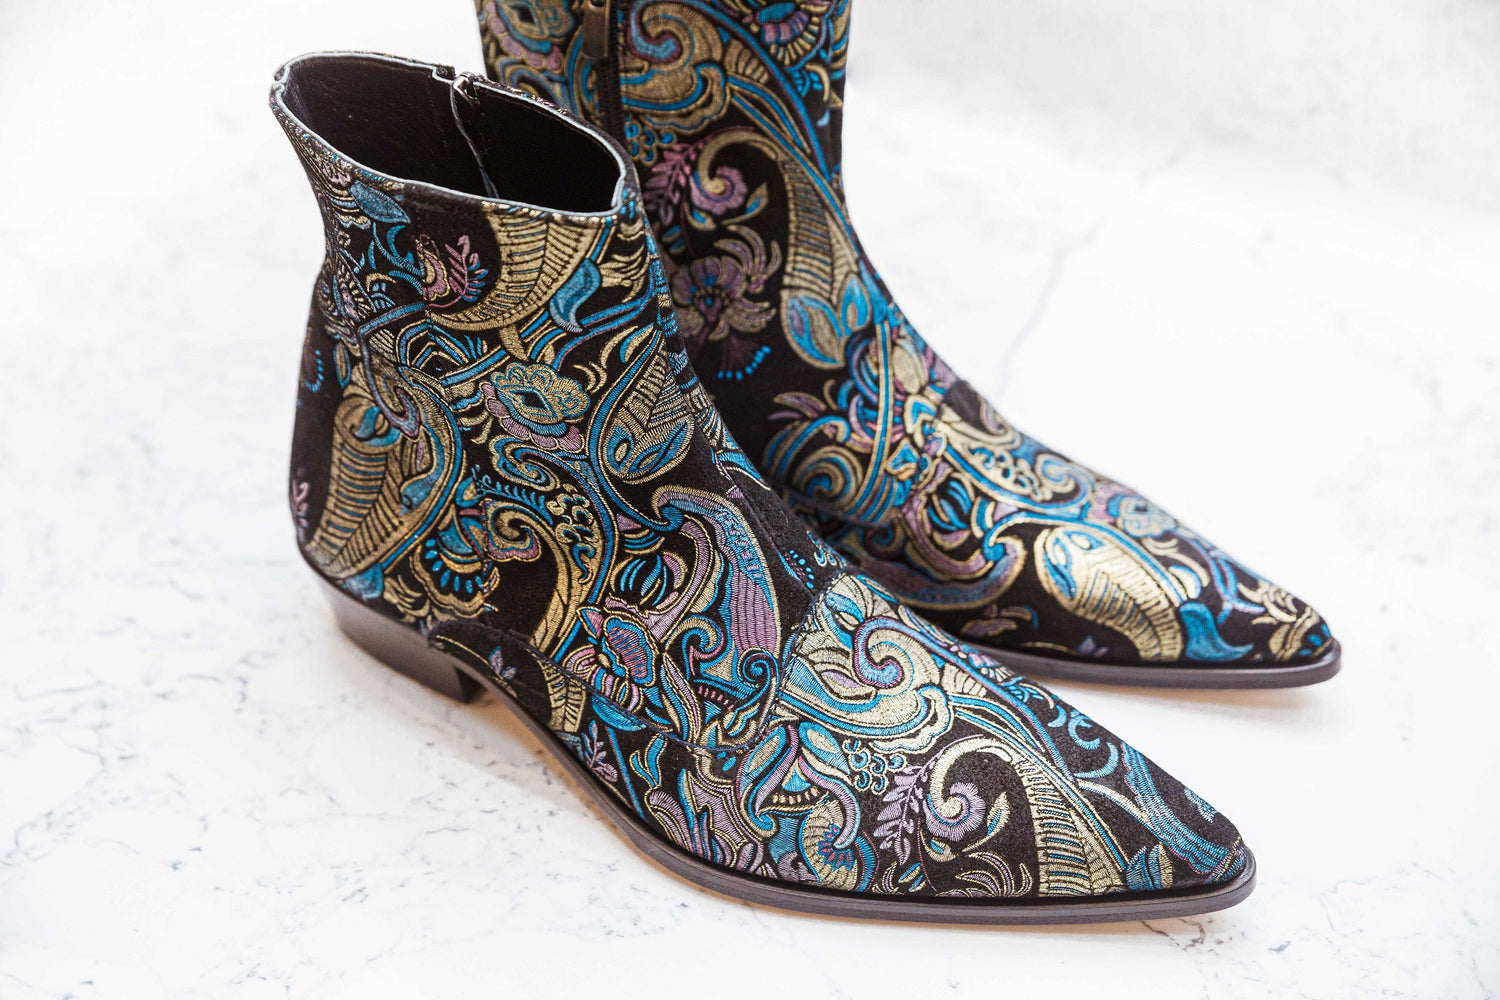 The Bohemia Boots - Shoes by Urbbana